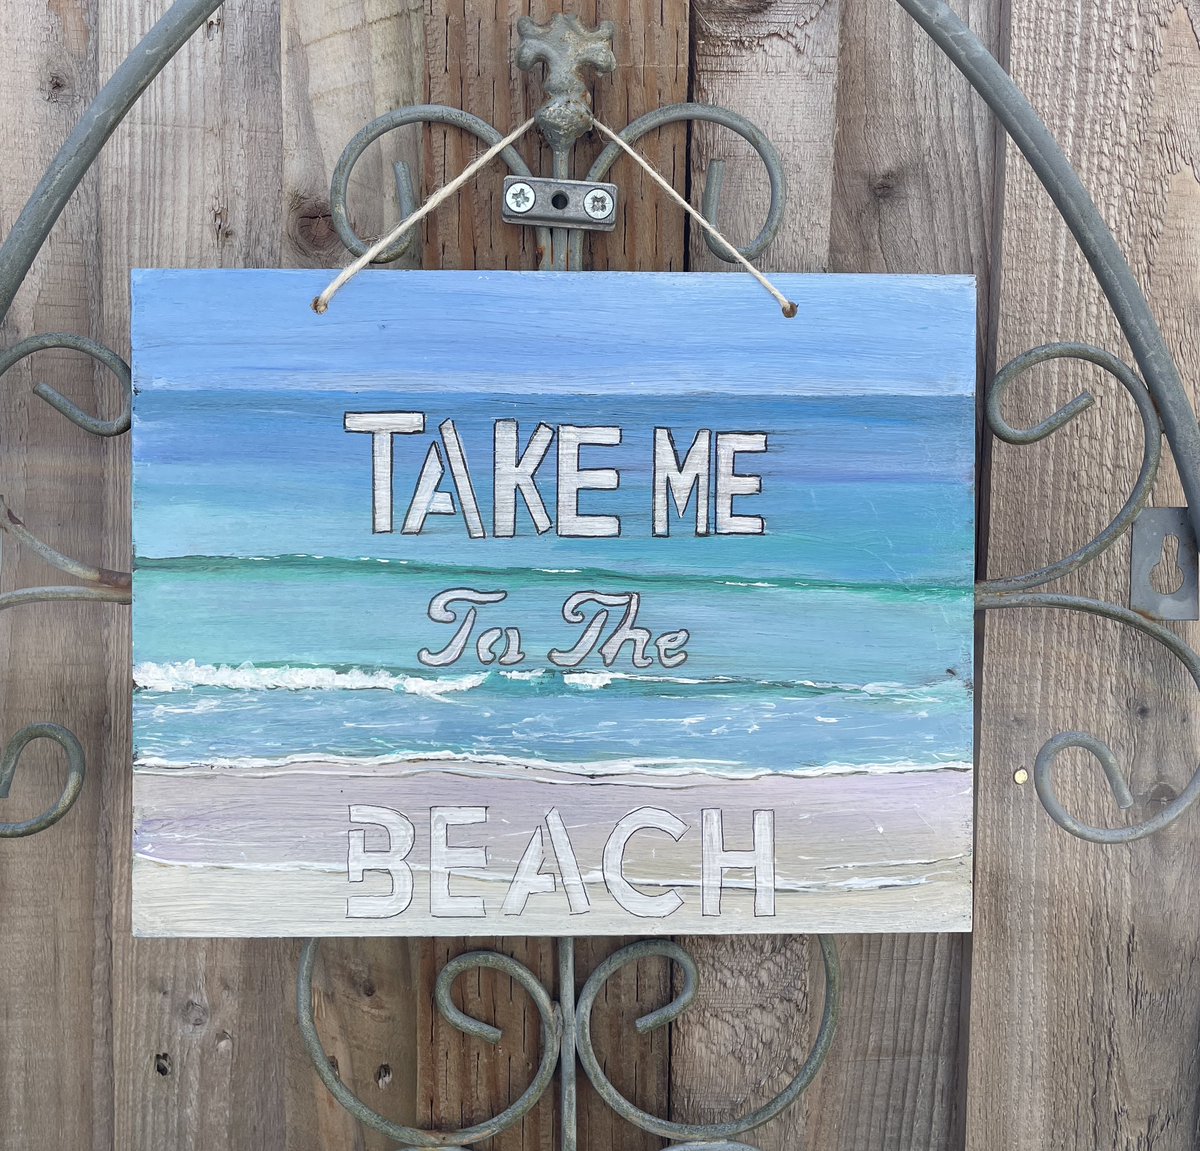 𝗧𝗮𝗸𝗲 𝗠𝗲 𝗧𝗼 𝗧𝗵𝗲 𝗕𝗲𝗮𝗰𝗵 𝗦𝗶𝗴𝗻 If you love the beach then this hand painted sign is for you Just £25 plus shipping Please drop message in comments for details 🌊 #EarlyBiz